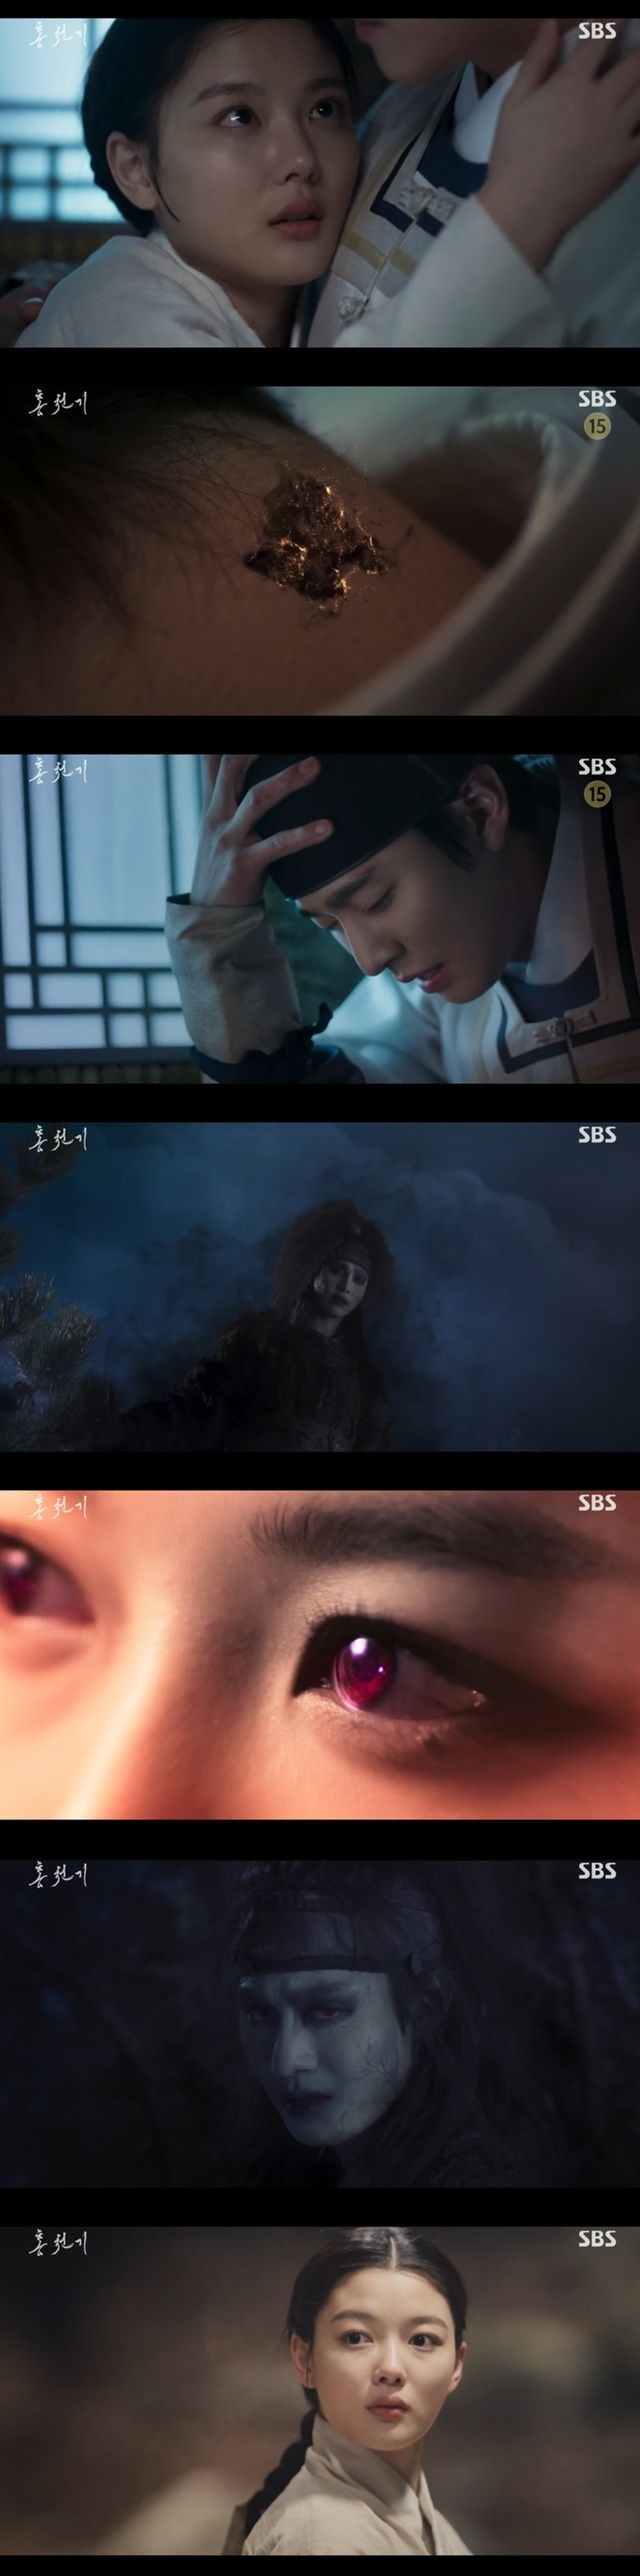 Erkönig, whose seal was unsealed, took the body of Ahn Hyo-seop and found Kim Yoo-jung with my eyes.In the second episode of SBSs monthly drama Time Hunggi, which was broadcast on August 31, Erlkönigs seal was released, and Haram and Timmy Hung were both in Danger.Seongjo (Cho Seong-ha) began to search for a painting to restore the painting when Yeongjong-yong, who sealed Erlkönig, burned down.Then 19 years passed and Timmy Hung (Kim Yoo-jung) became a white oil painting company.Timmy Hung earned money by working on a forgery at Wolsong to buy medicine to treat his father, Hong Eun-oh (Choi Kwang-il), madness.However, the ten thousand-year-old gold ball was manipulated by Jeong Nae (Yang Hyun-min) of Wolseongdang, and it had no effect.At the same time, Haram (Ahn Hyo-seop Boone) worked as a housewife at the preface, losing her sight.Haram then went to Wolsong to reveal the identity of the partys moonlight, saying, The star says that the attribution appears from the east.The figure of the Wall St. Party was veiled as a figure who had no idea what to do. Haram heard the voice of Timmy Hung, who was receiving the price of the forgery, but did not recognize it.Haram pledged revenge after losing his vision and his parents 19 years ago, and after the Lord Sejo of Joseon (Mr. Kwak Si-yang) was ambitious and tried to meet the moon.Hong Eun-oh did not recognize his daughter Timmy Hung because of the madness, and Sam-shin (Moon Sook) took Hong Eun-ohs painting and predicted to Timmy Hung that there will be a flower kiln ride.Haram sent a message to the Lord of Joseon to meet him at the deep hearing angle, and Timmy Hung found that the drug maker who deceived him was in the deep hearing angle.Haram and Sejo of Joseon met at the deep hearing angle and planned for the later days, and Hamam heard Timmy Hung punishing the drug maker.Haram found out late that I had deceived Timmy Hung.Timmy Hung accused Jeong-nae of Guan-ah with the help of Cha Young-wook (Hong Jin-ki) and Choi Jung (Hong Kyung-min), and Jung-nae was angry when she found out that Timmy Hung had accused her.After spending money, Jung started to pursue Timmy Hung, and Timmy Hung hid in Harams flower kiln.Haram hid Timmy Hung from Jung, and Timmy Hung looked at Harams red eyes and said, My eyes are really pretty, like reddish reddish red.People look at my eyes and call me a water blistering, Haram responded.When the kiln shook and Haram and Timmy Hung embraced, Erlkönig, who was sealed in Harams body, reacted to the eyes of Timmy Hung, originally Erlkönigs.The butterfly tattoos engraved by the Three Gods sealed Erlkönig to Haram disappeared, and Haram groaned in pain and let Timmy Hung get off the kiln right away.Shortly after Timmy Hung got off the kiln, the kilns were appalled when the kiln became heavy and soon Haram became one with Erlkönig.